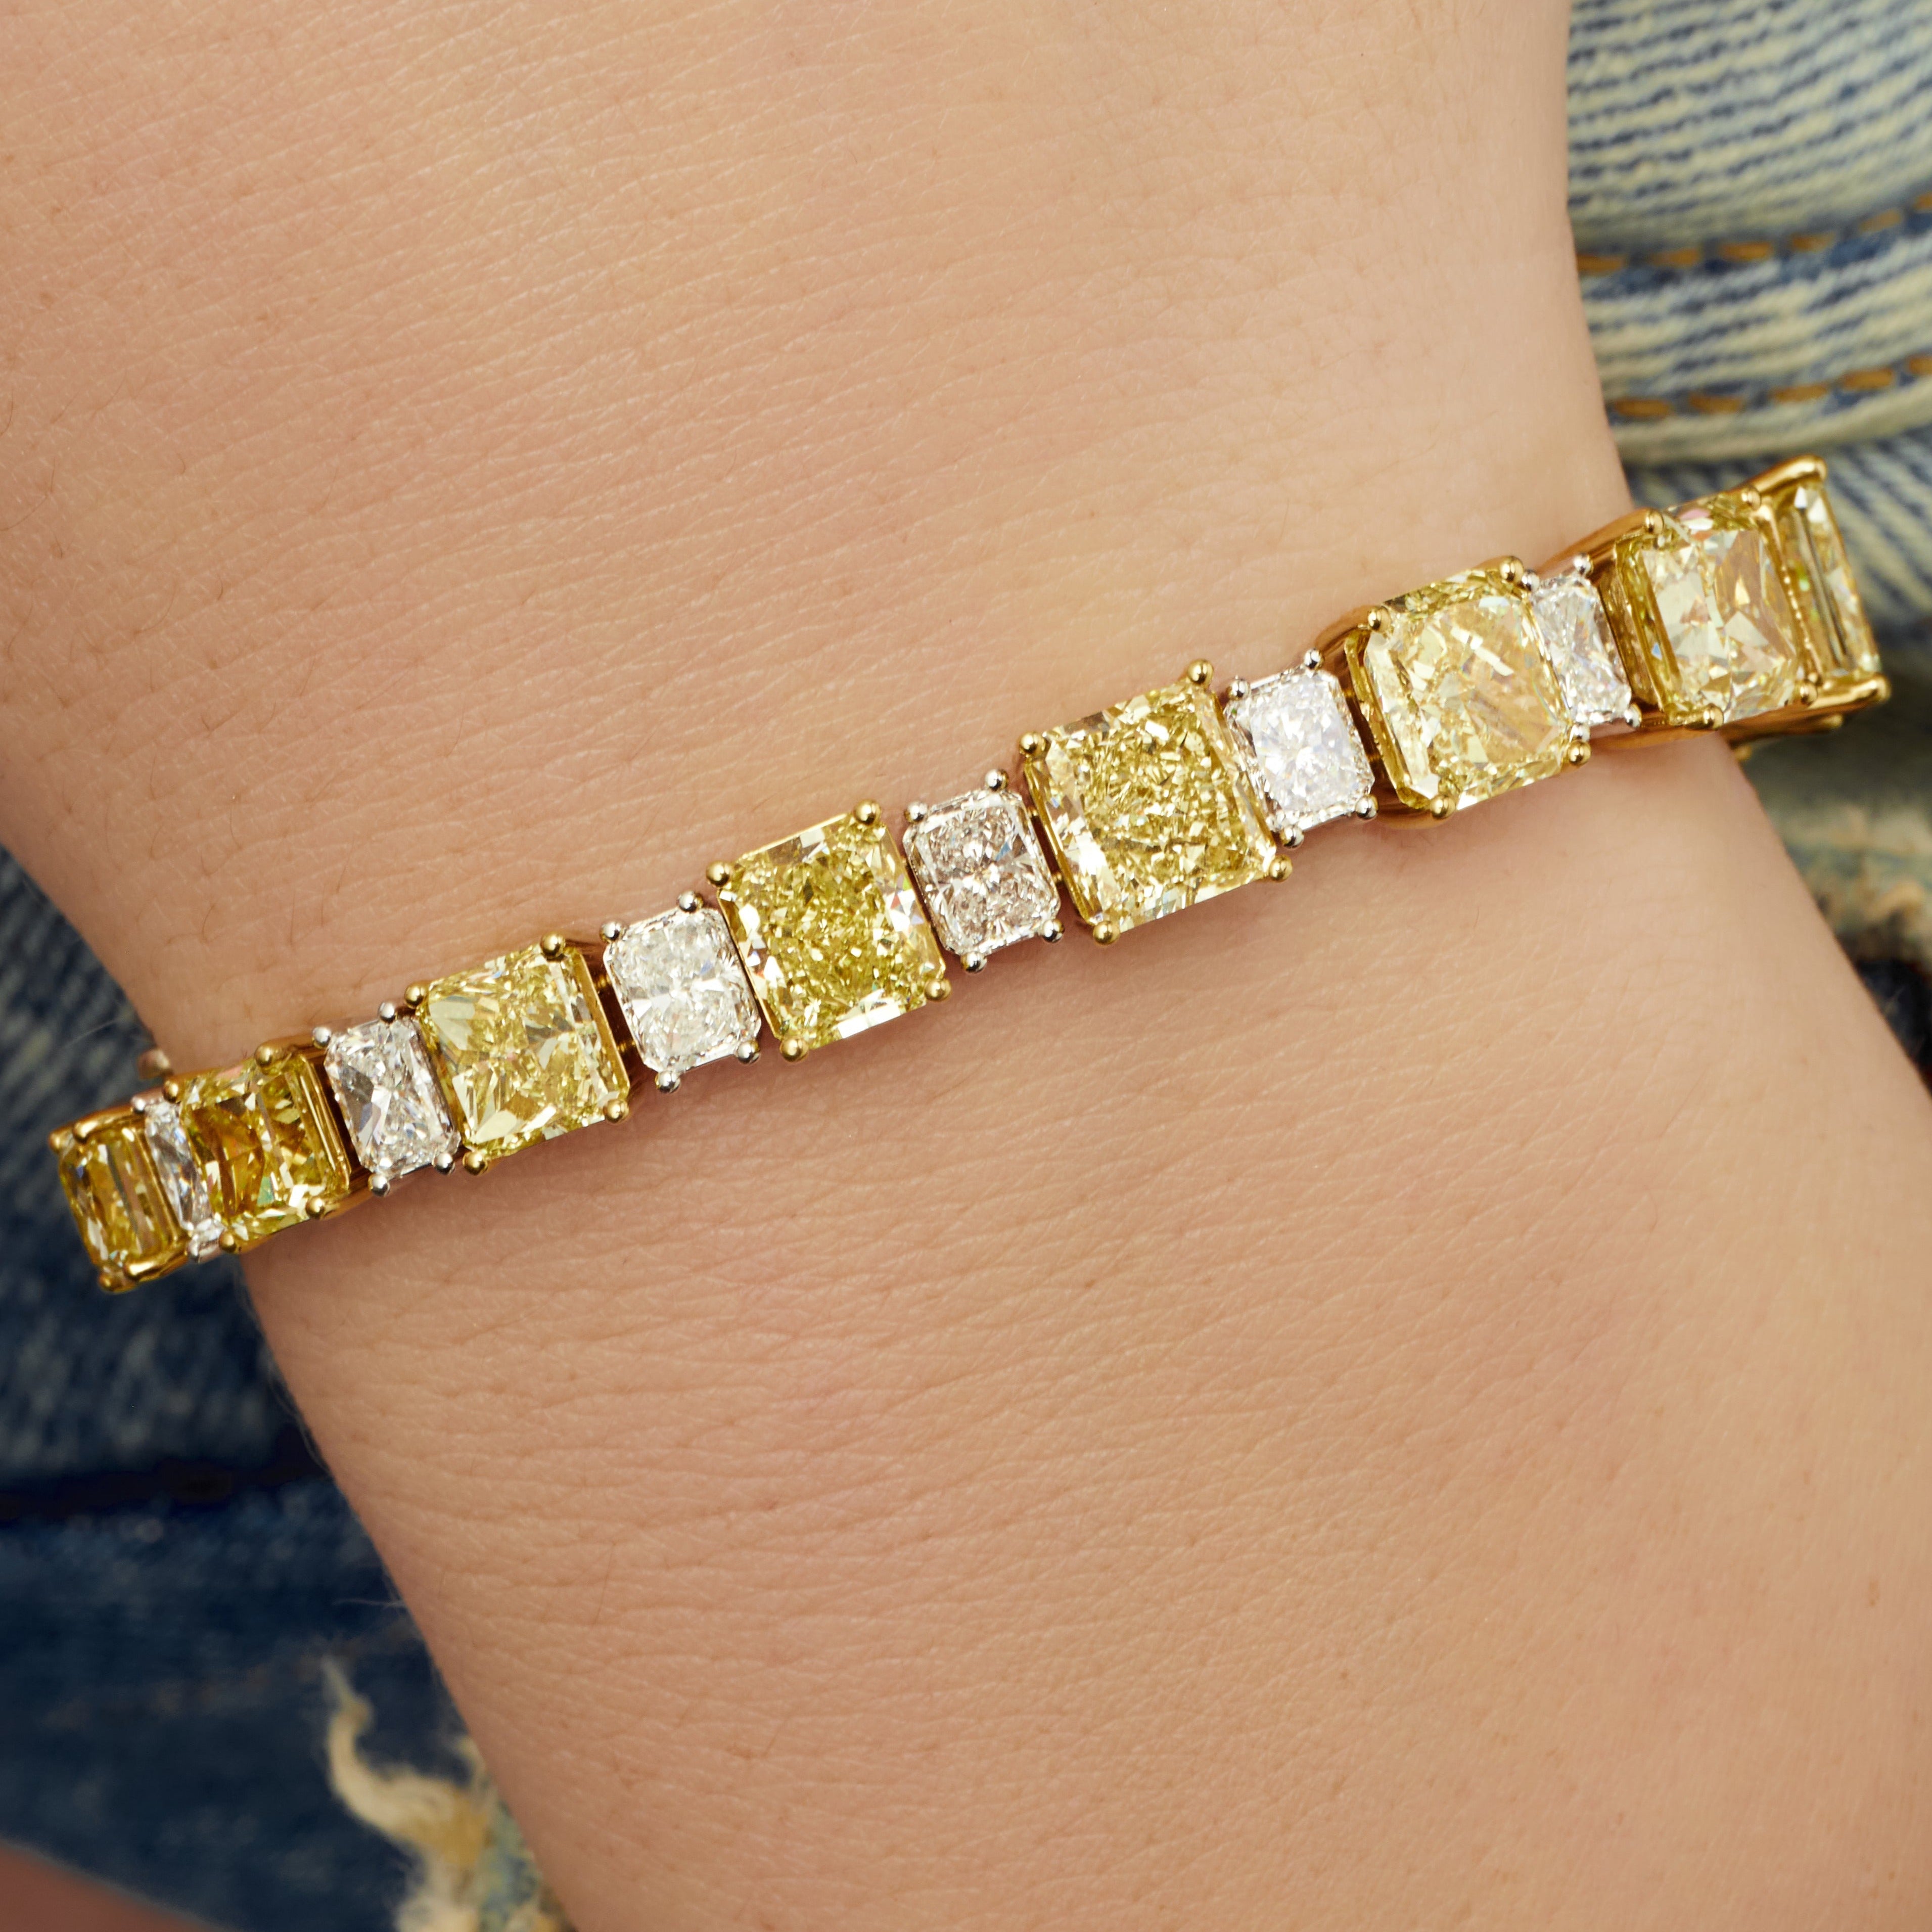 Radiant Cut Alternating Fancy Yellow and White Tennis Diamond Bracelet in 18 Karat Yellow Gold and White Gold